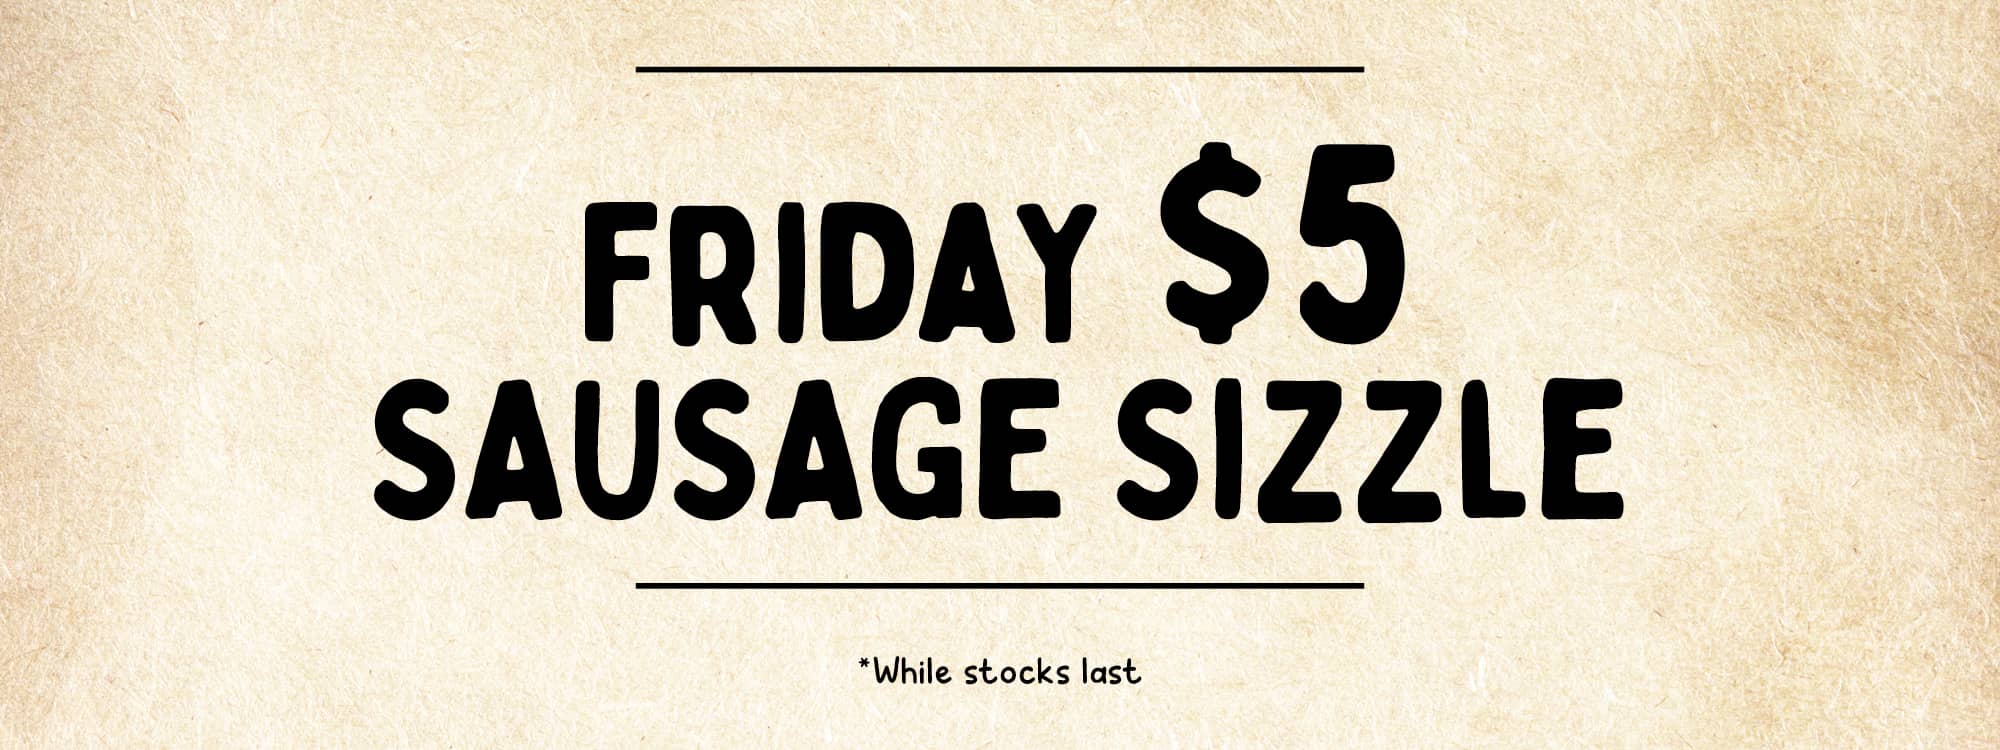 Friday Sausage Sizzle